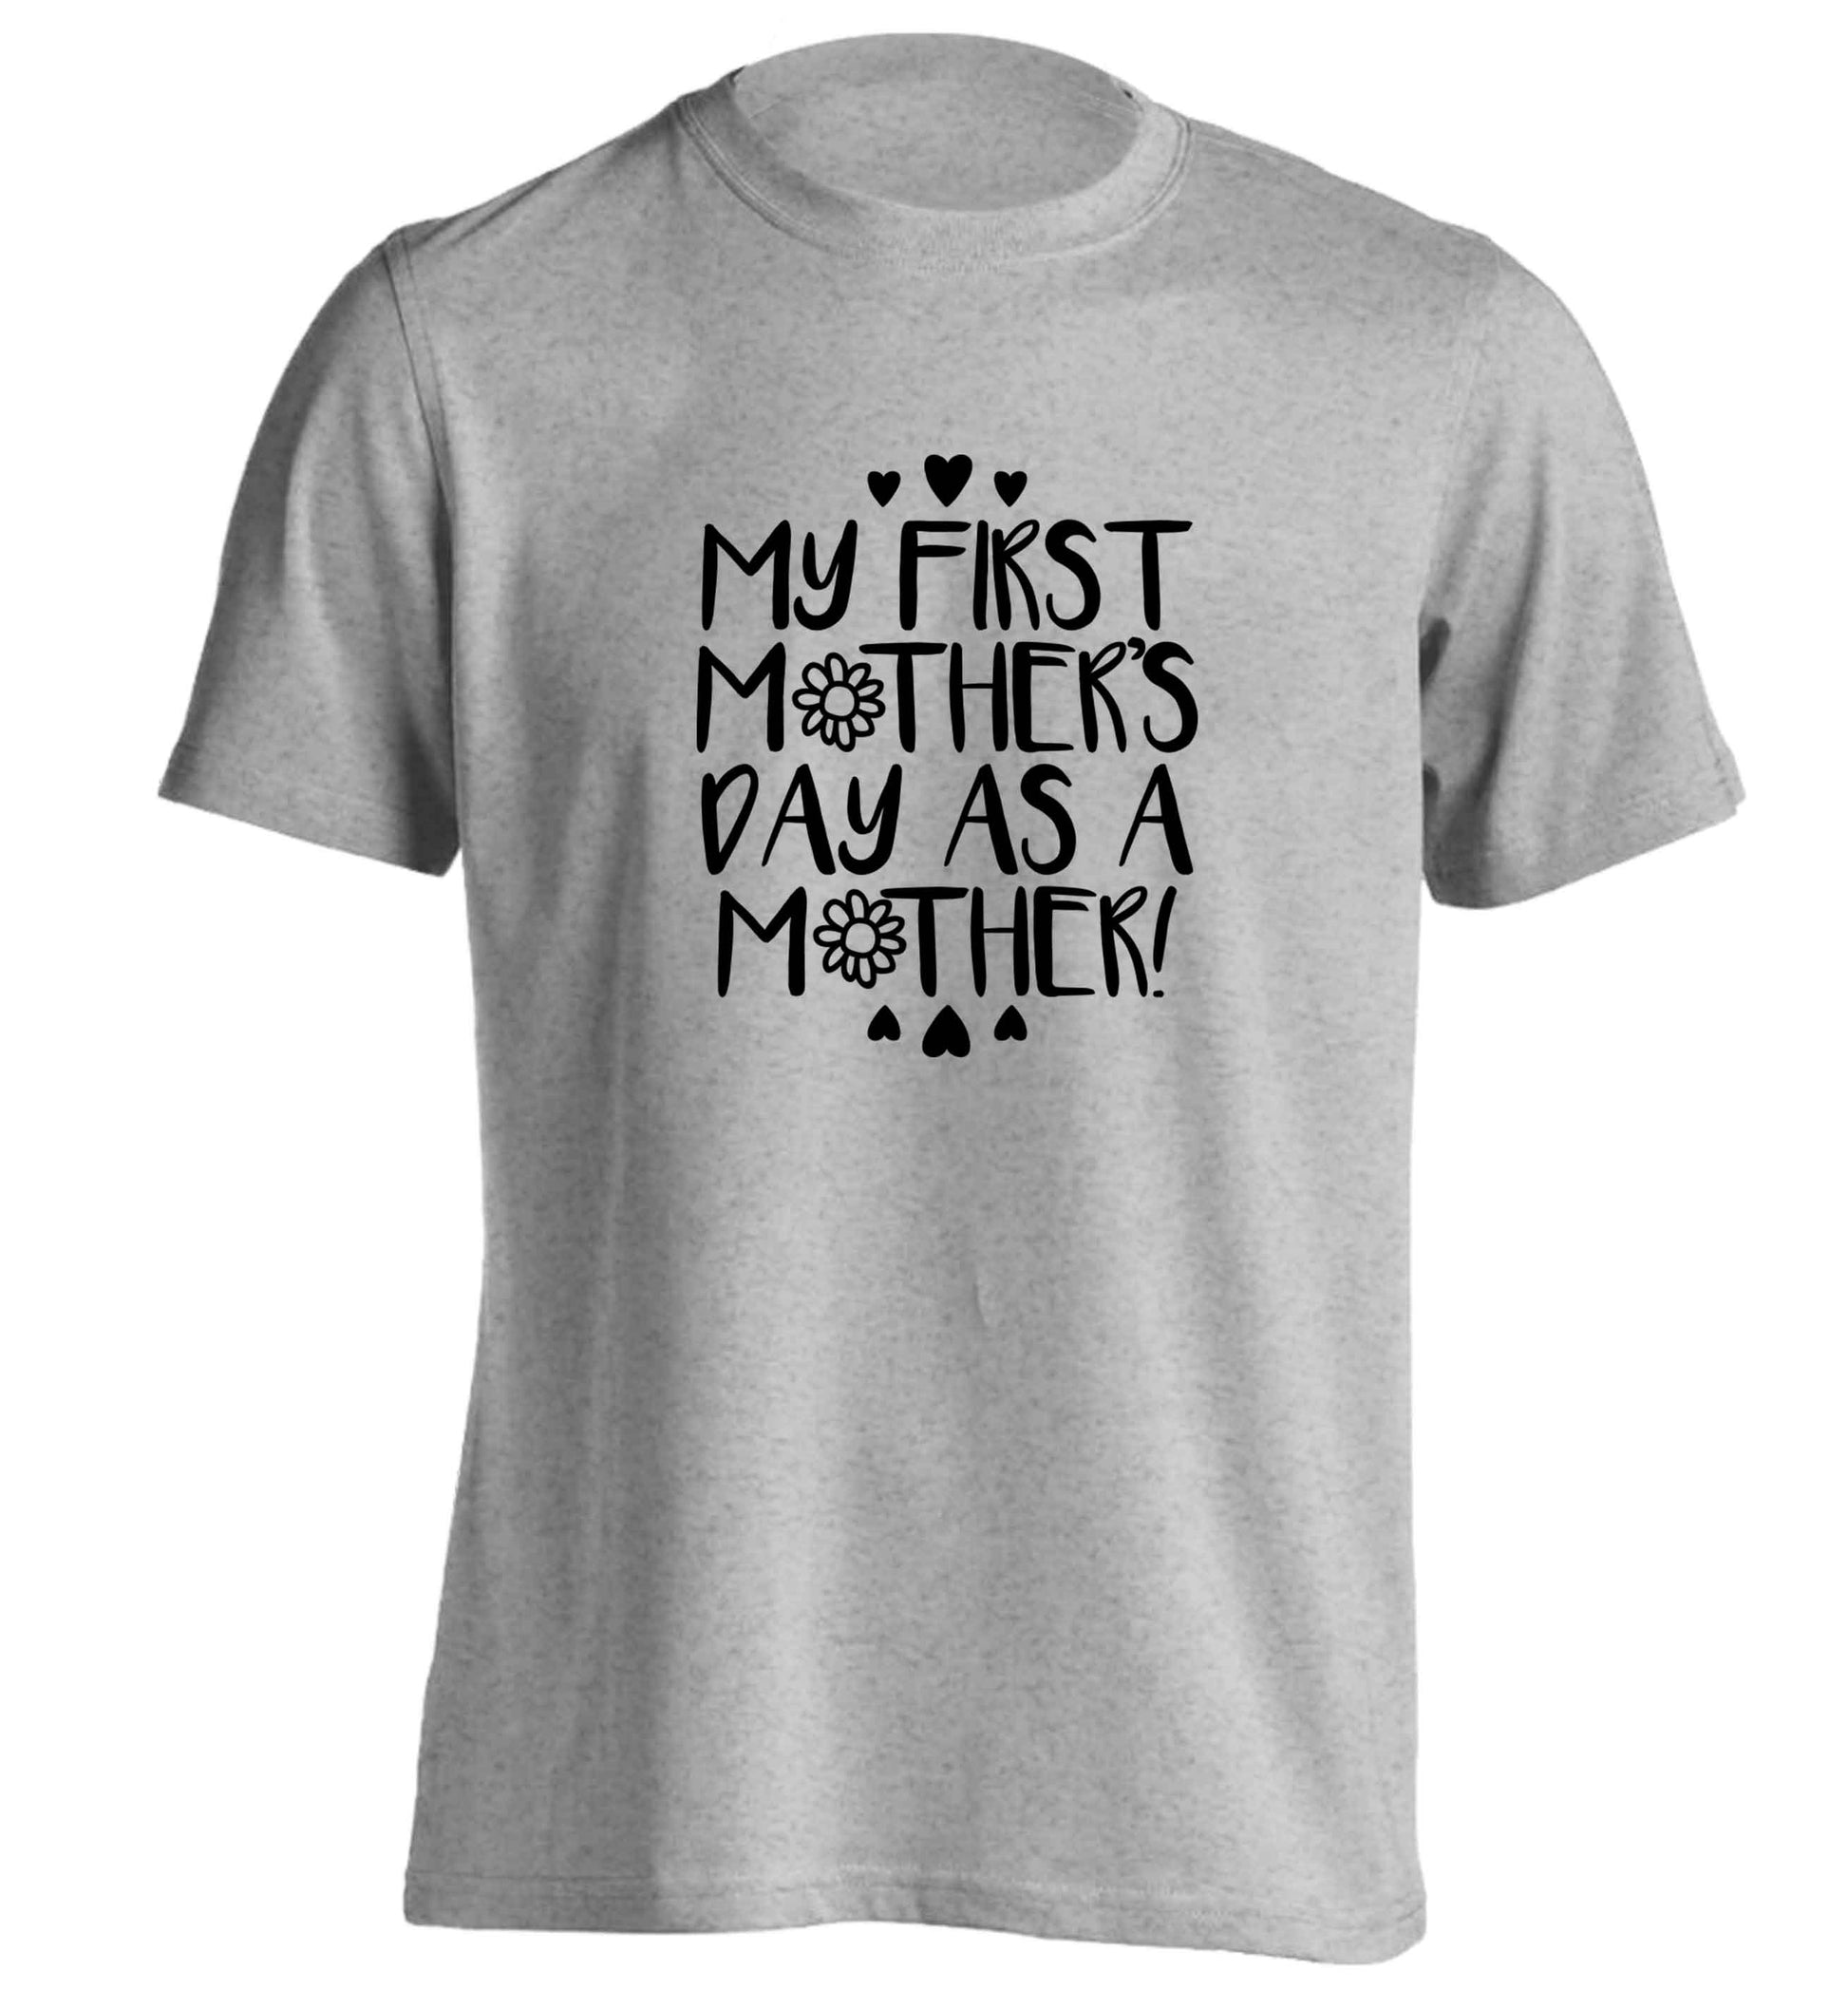 It's my first mother's day as a mother adults unisex grey Tshirt 2XL